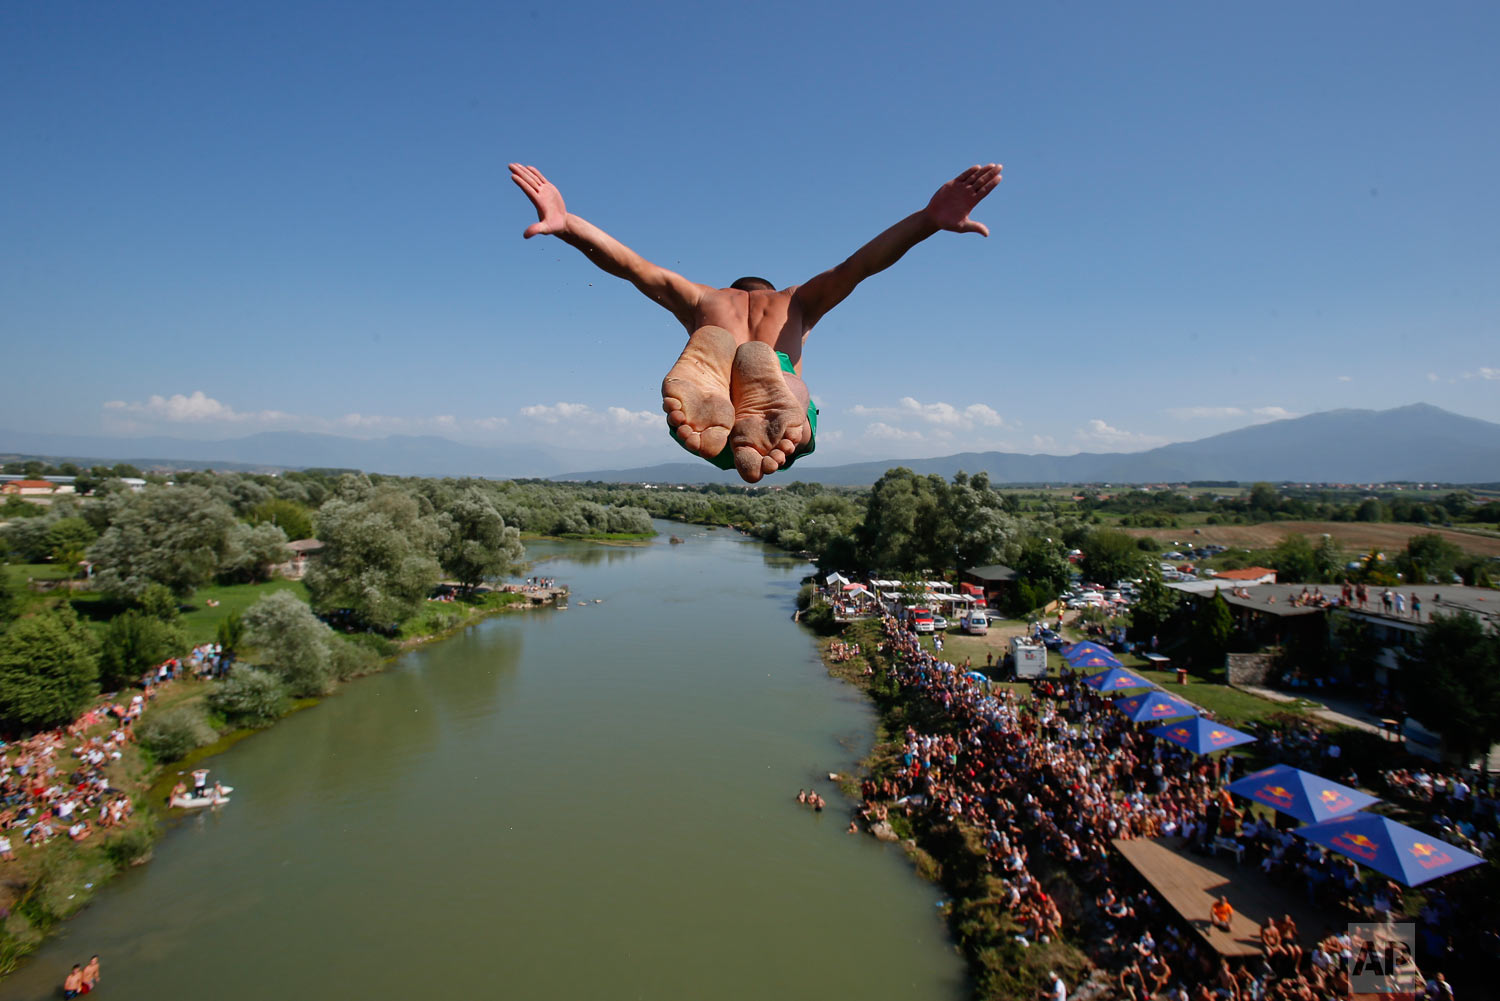  Spectators watch from the river banks as a diver launches from the Ura e Shejnt bridge during the 68th annual high diving competition, near the town of Gjakova, Kosovo on Sunday, July 22, 2018. (AP Photo/Visar Kryeziu) 